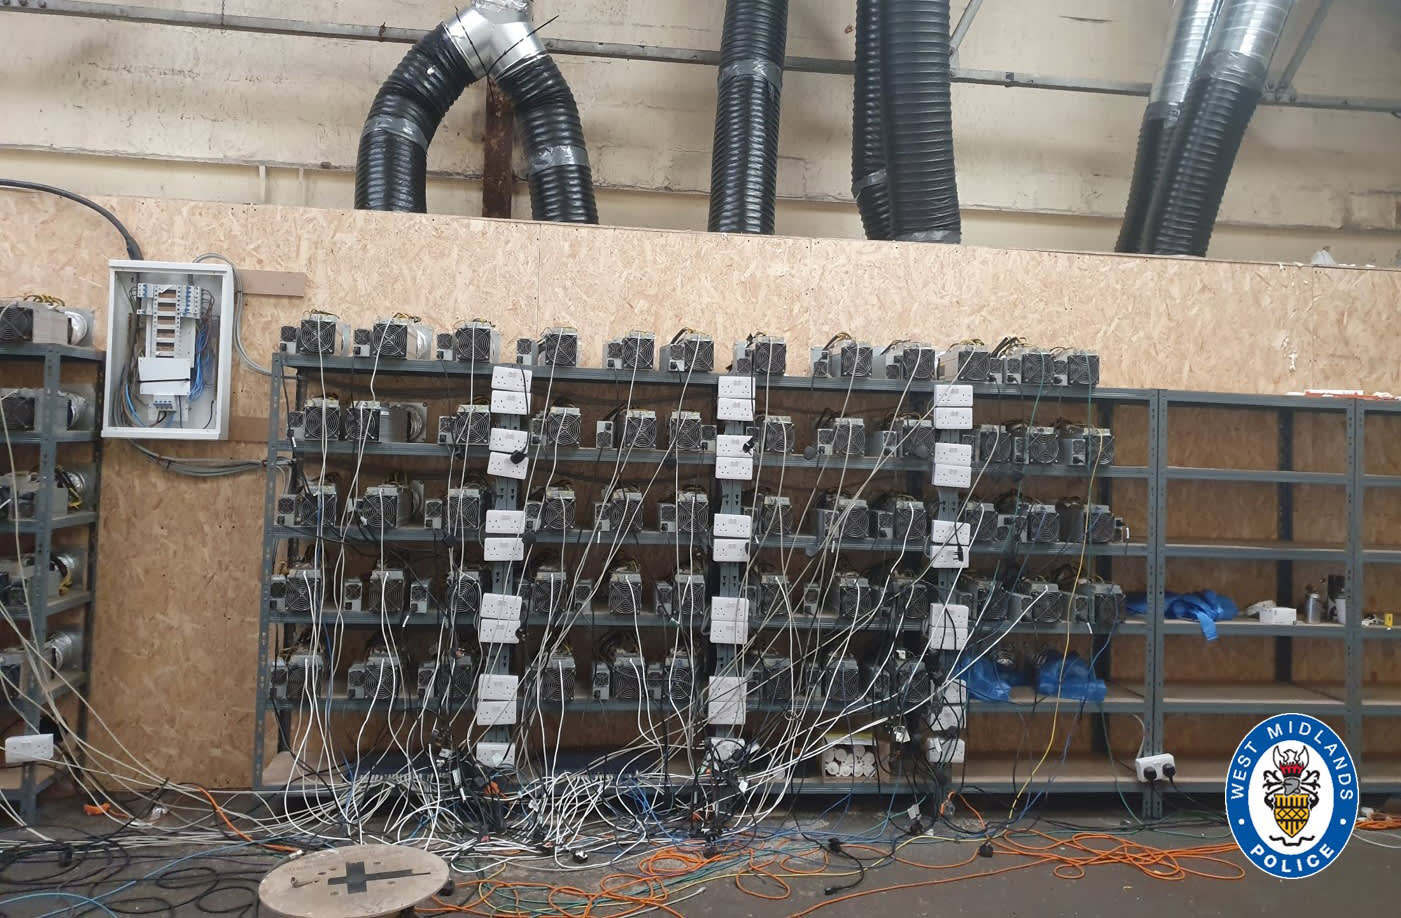 Massive bitcoin mine discovered in UK after police raid suspected cannabis farm